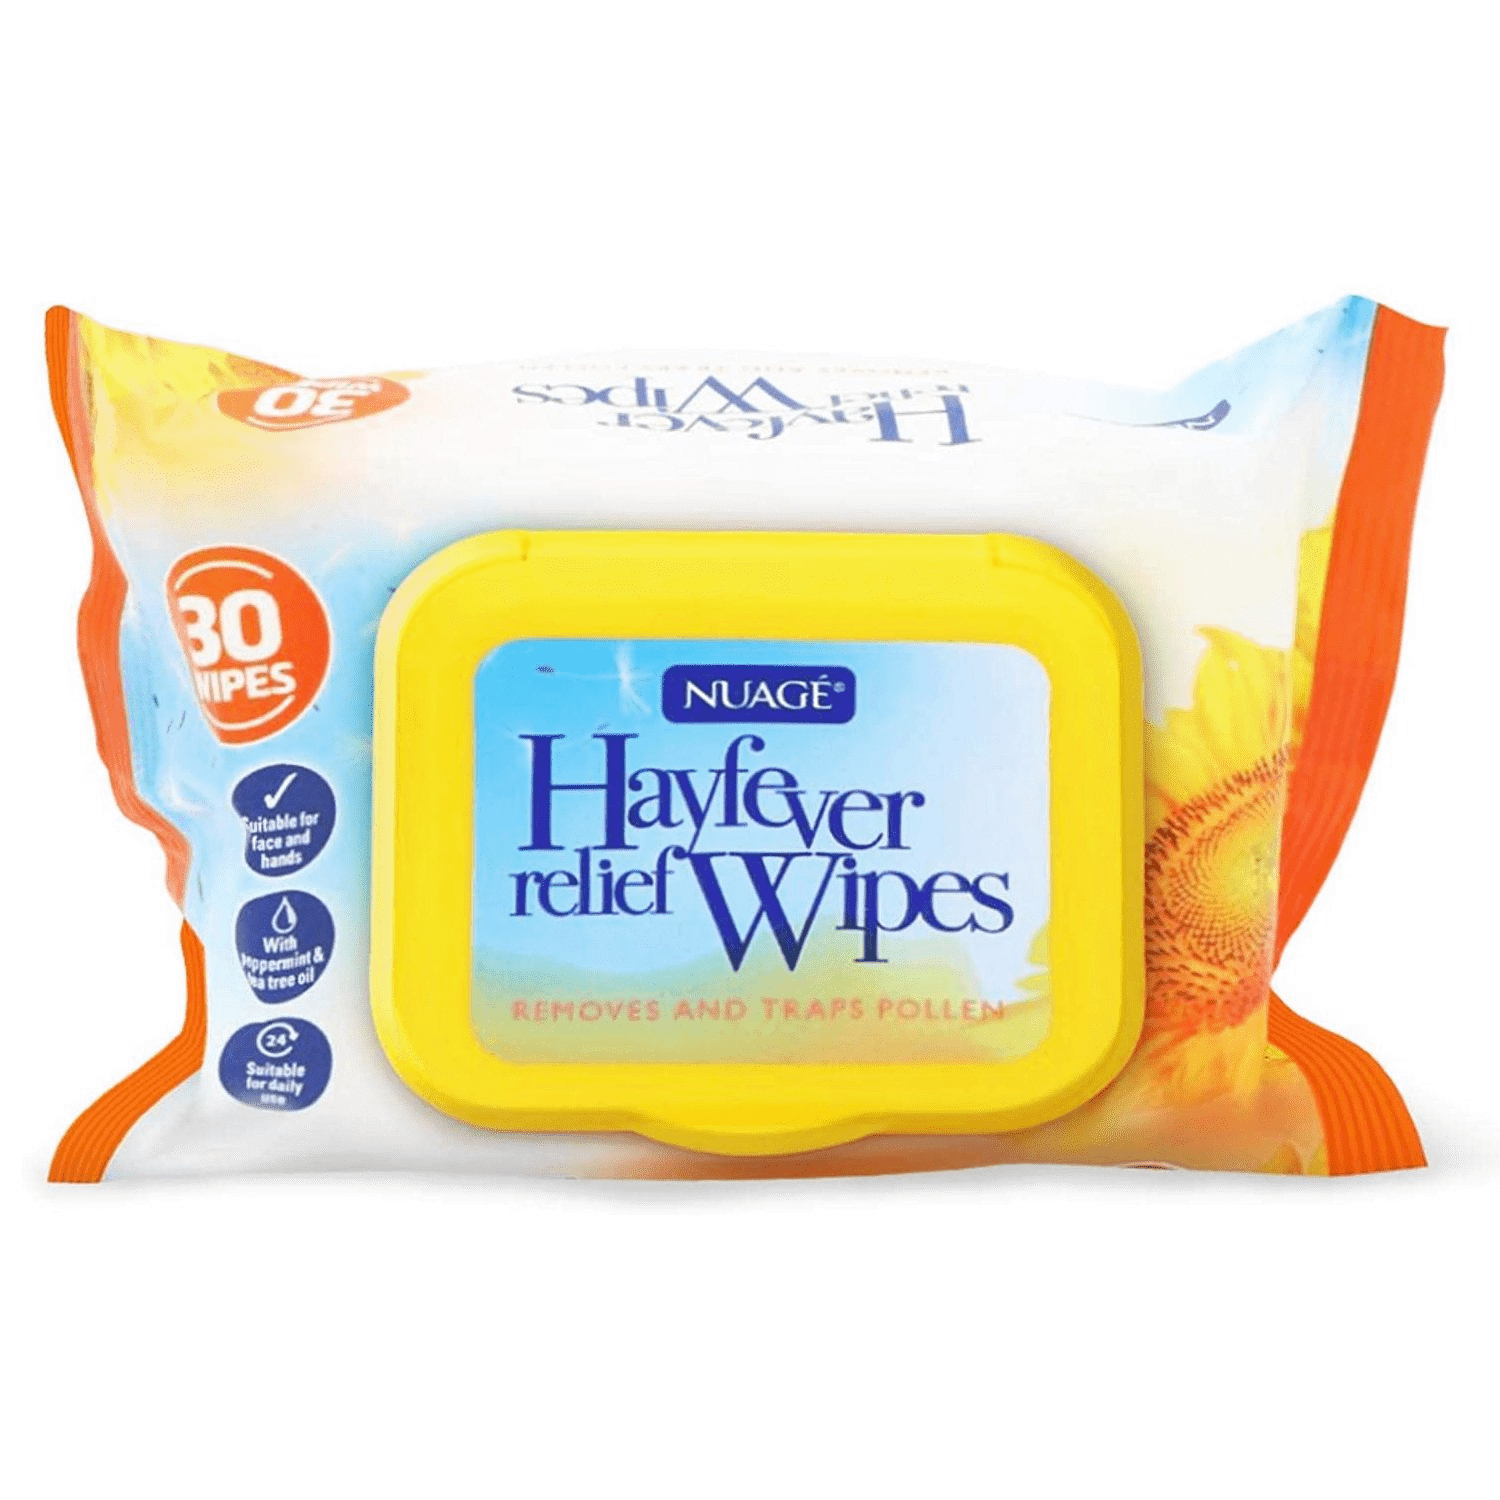 hayfever-relief-wipes